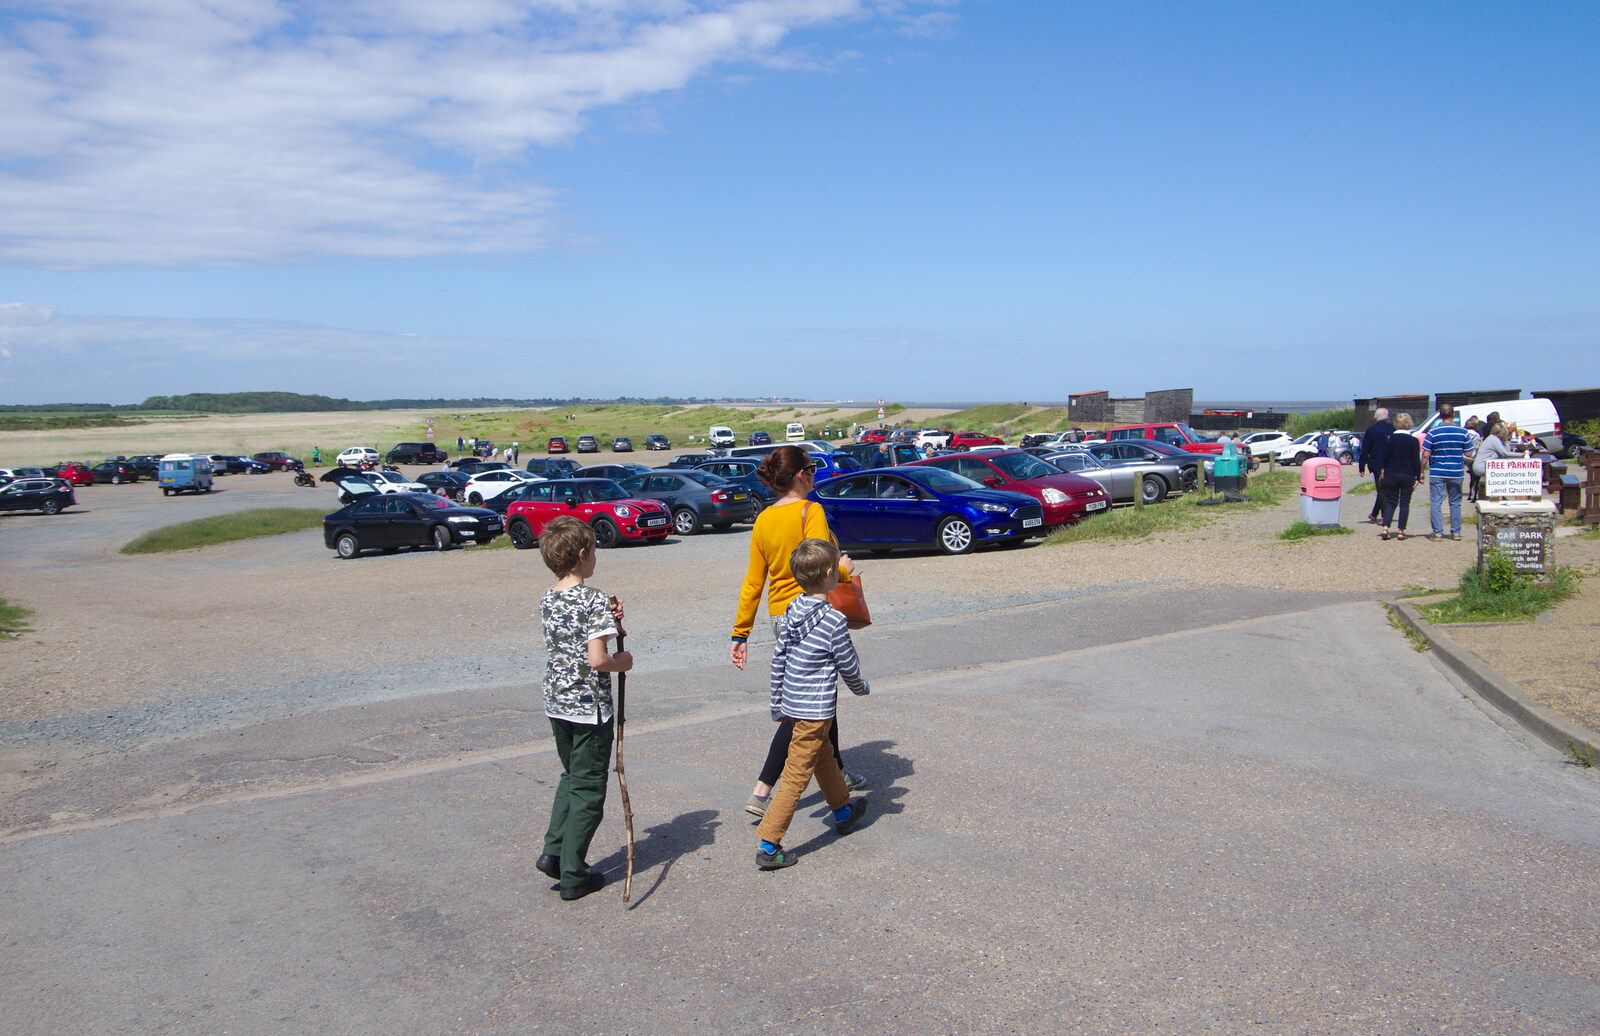 We stride into the car park at Dunwich from Cliff House Camping, Dunwich, Suffolk - 15th June 2019